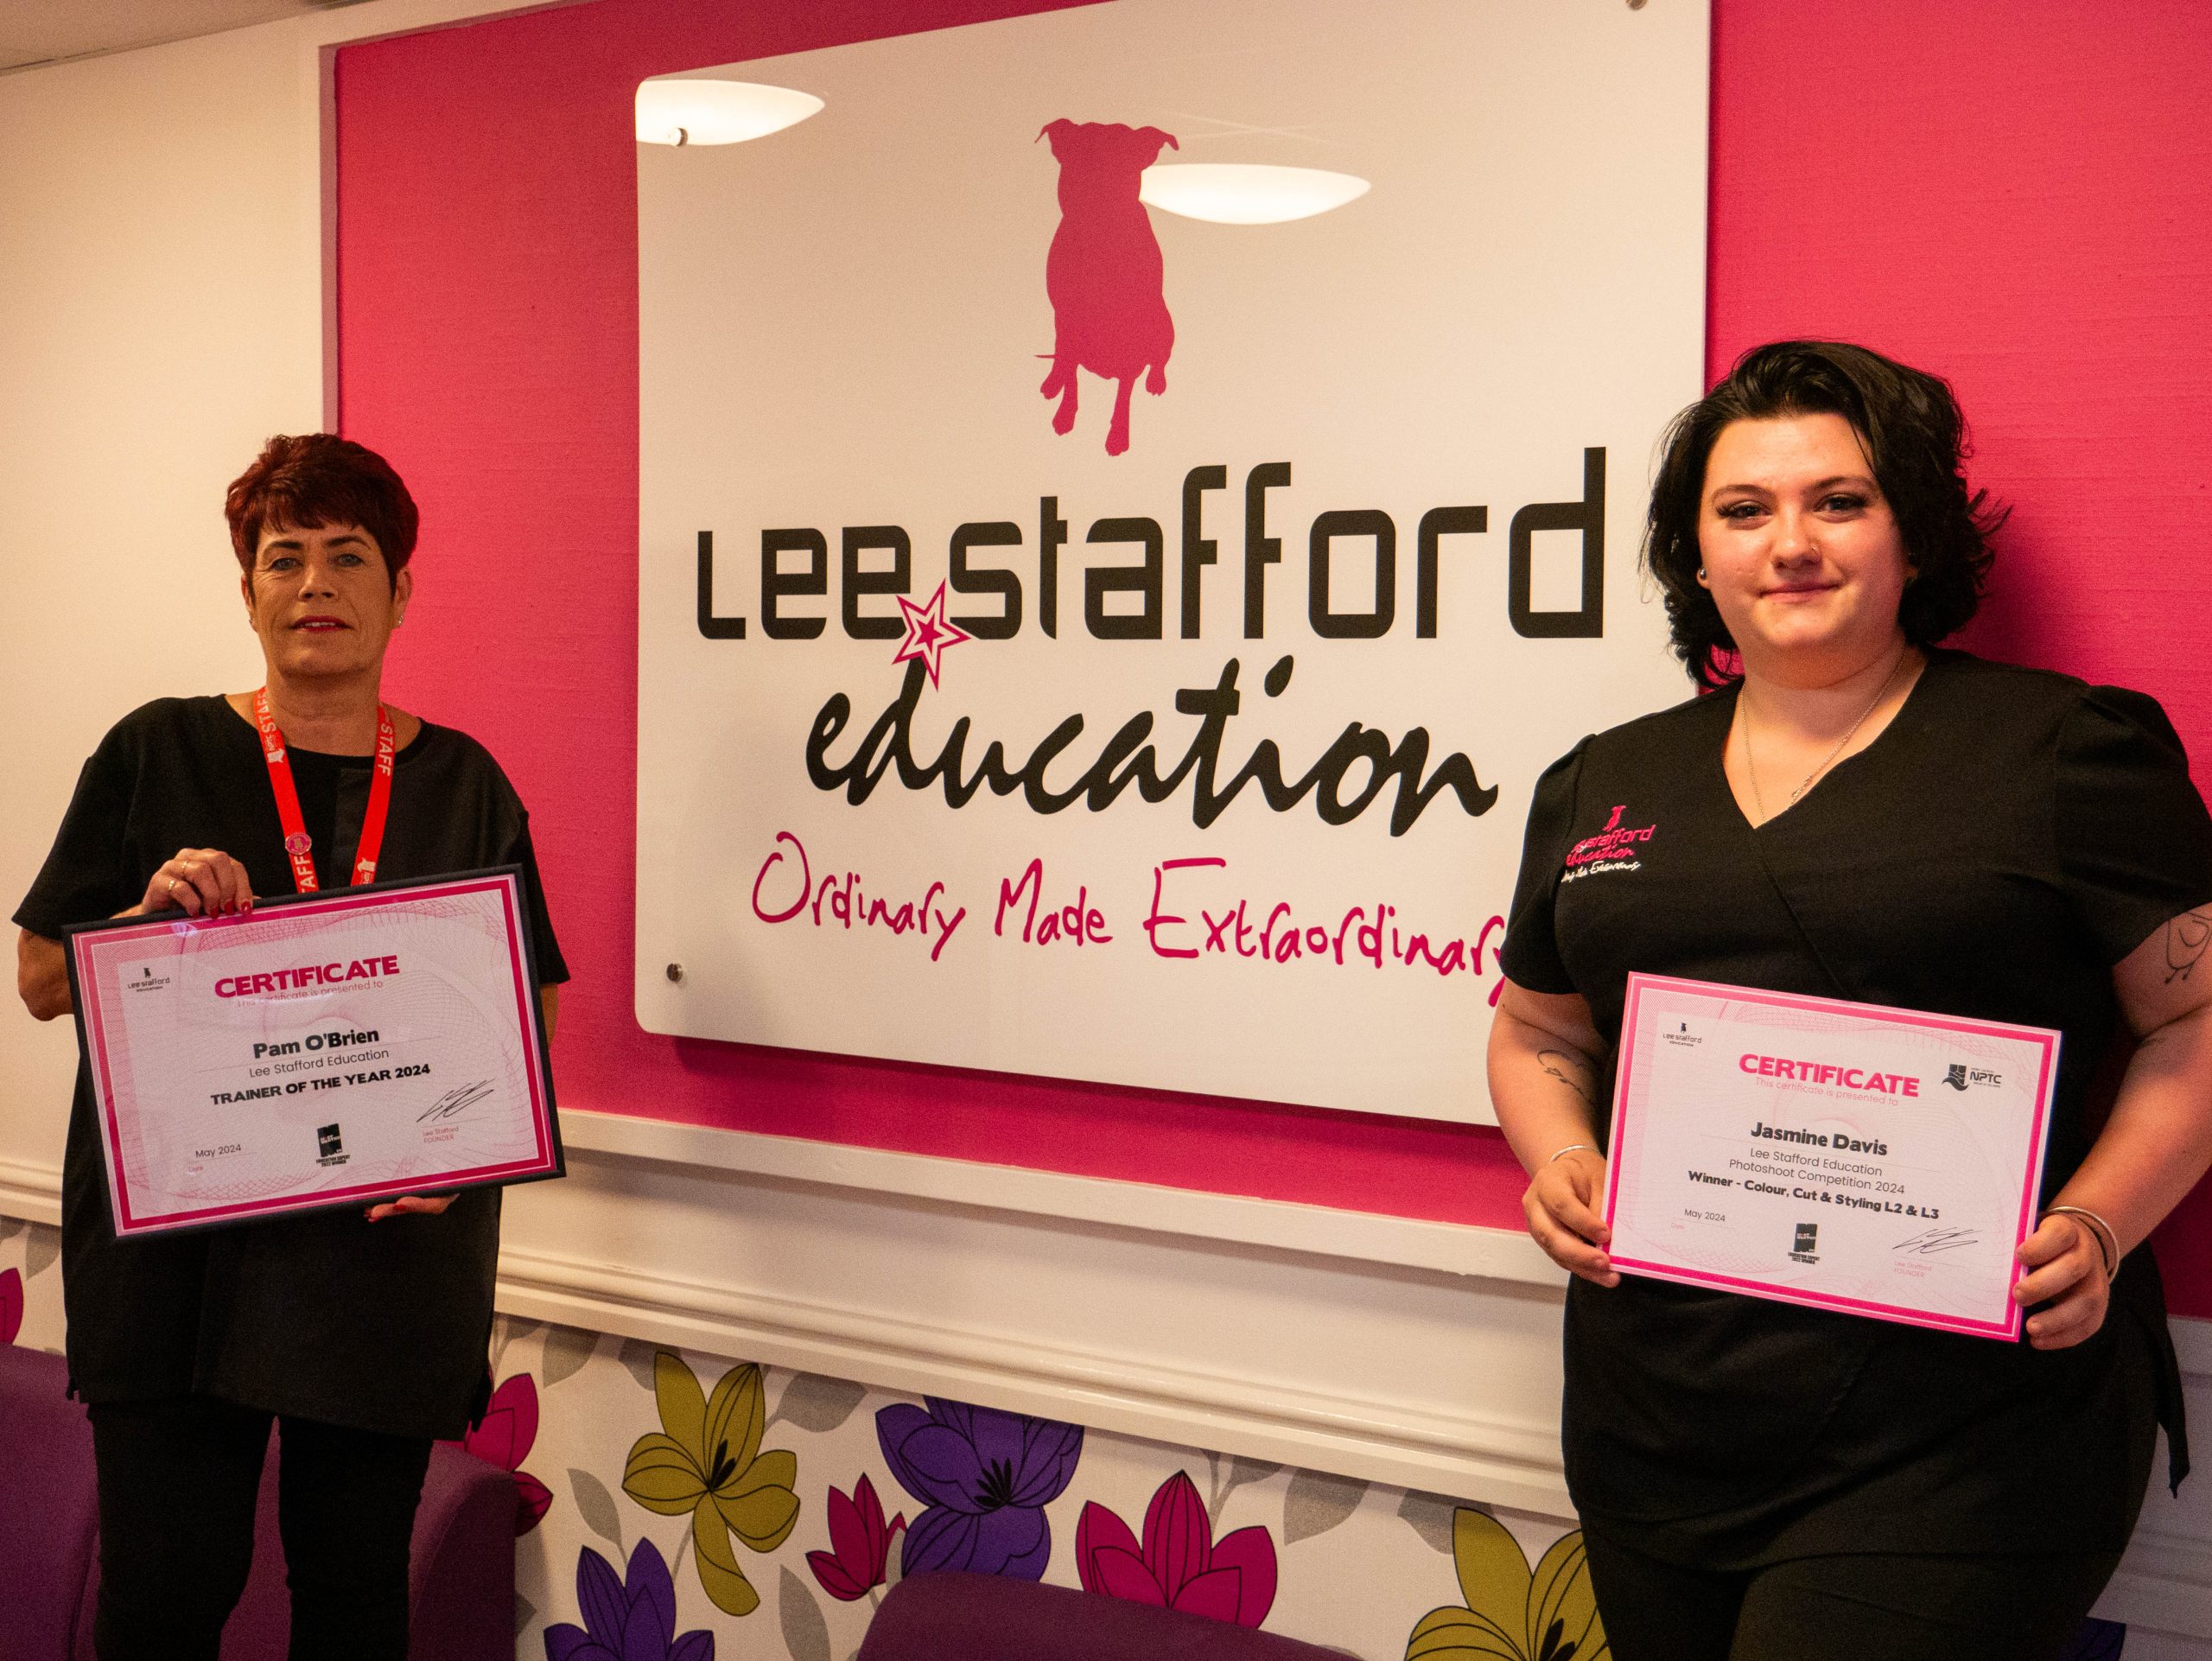 Pamela O’Brien and Jasmine Davies with their awards in front of the Lee Stafford Education sign at Afan College